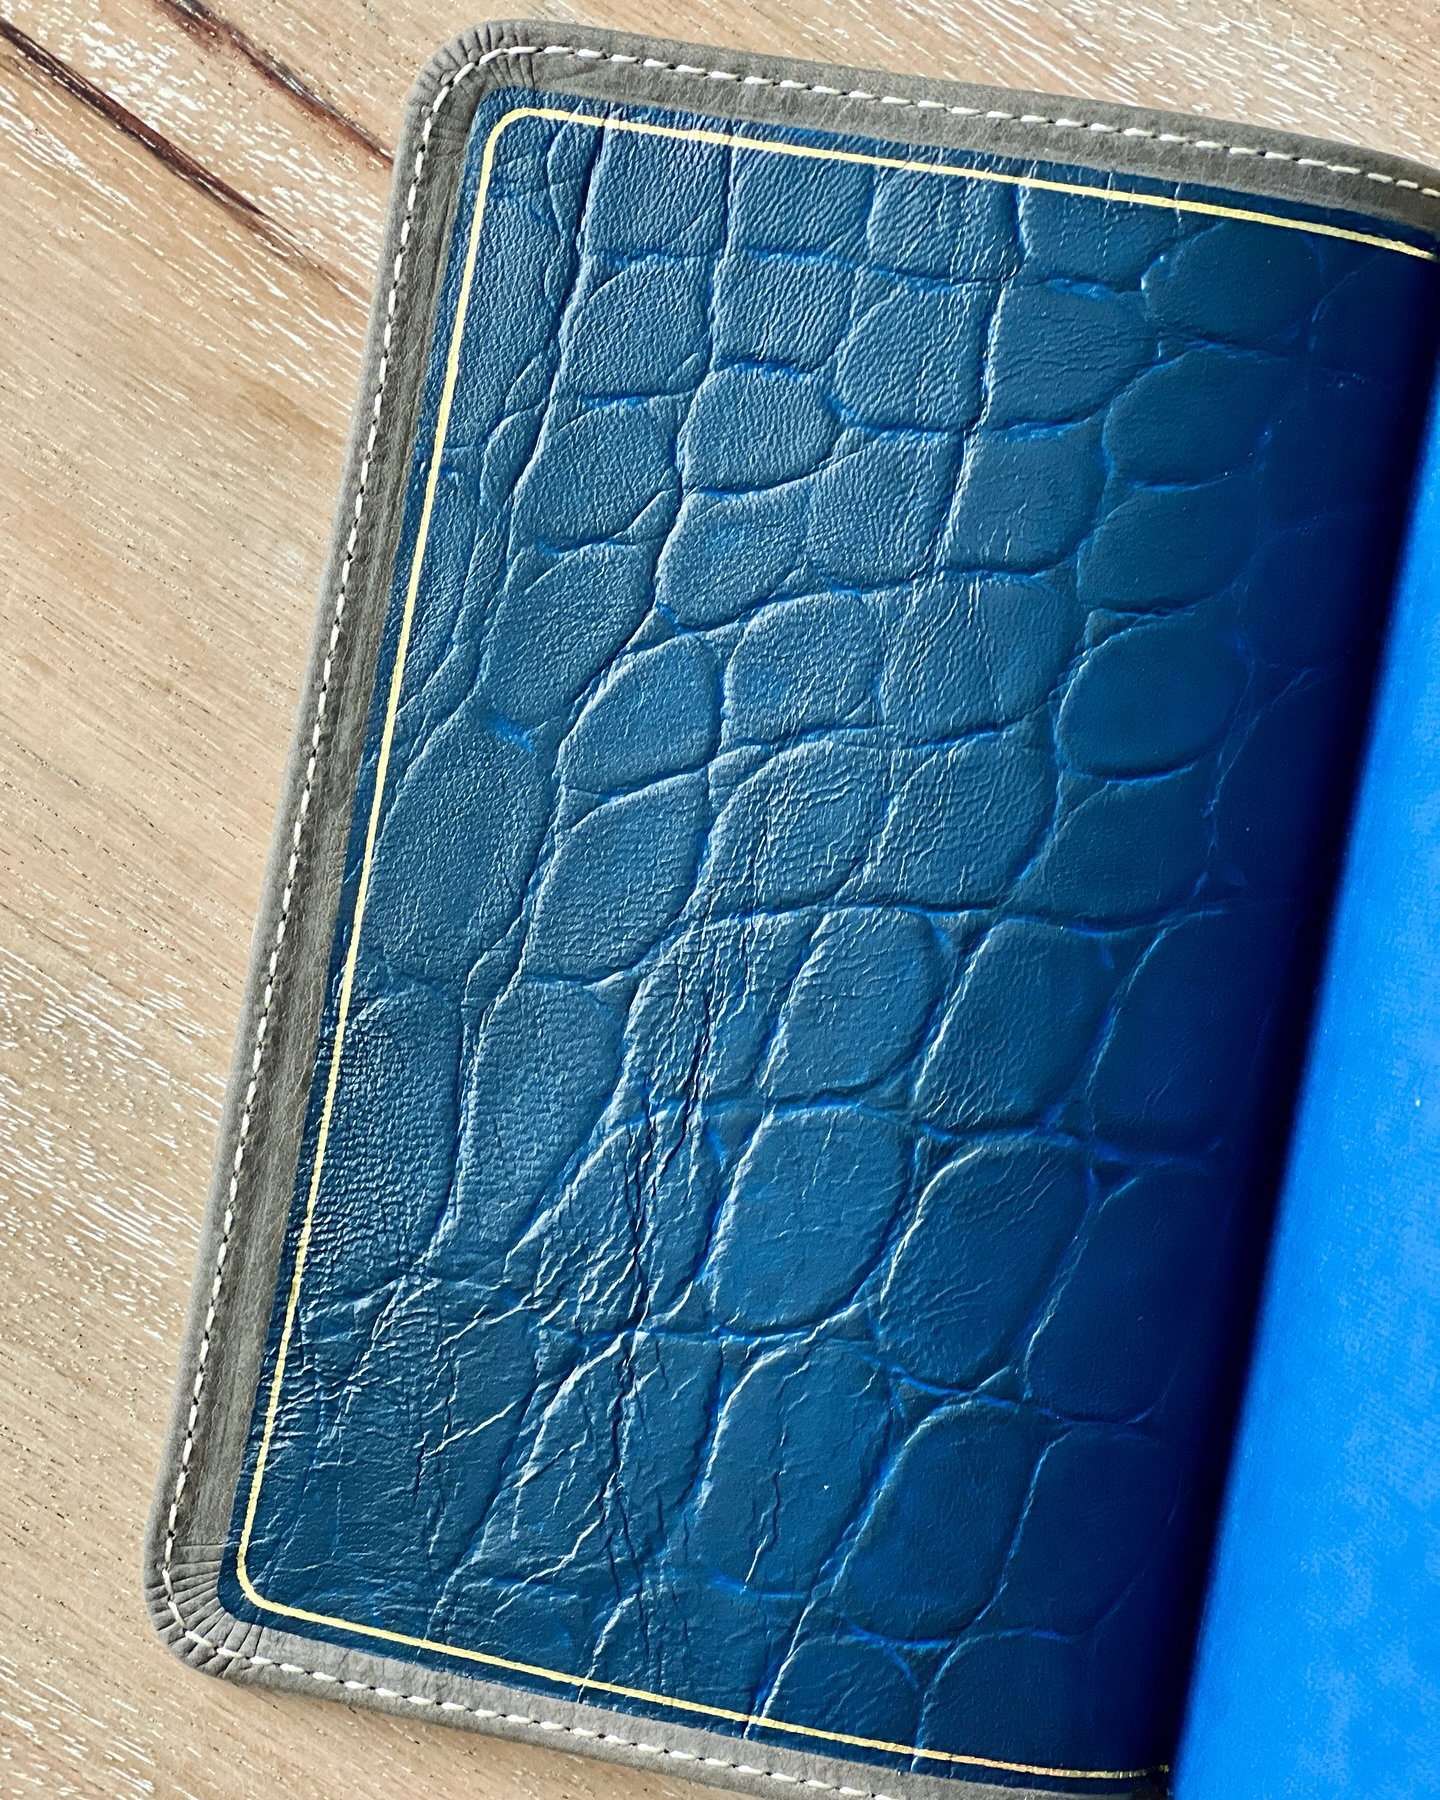 A lot of people have been raving about this dark blue &ldquo;croc-embossed&rdquo; lambskin liner on my new rebind from @floresh_bibles. 💙 I love how it adds a unique pop of color and texture to the interior&hellip; but I wonder if it would look good